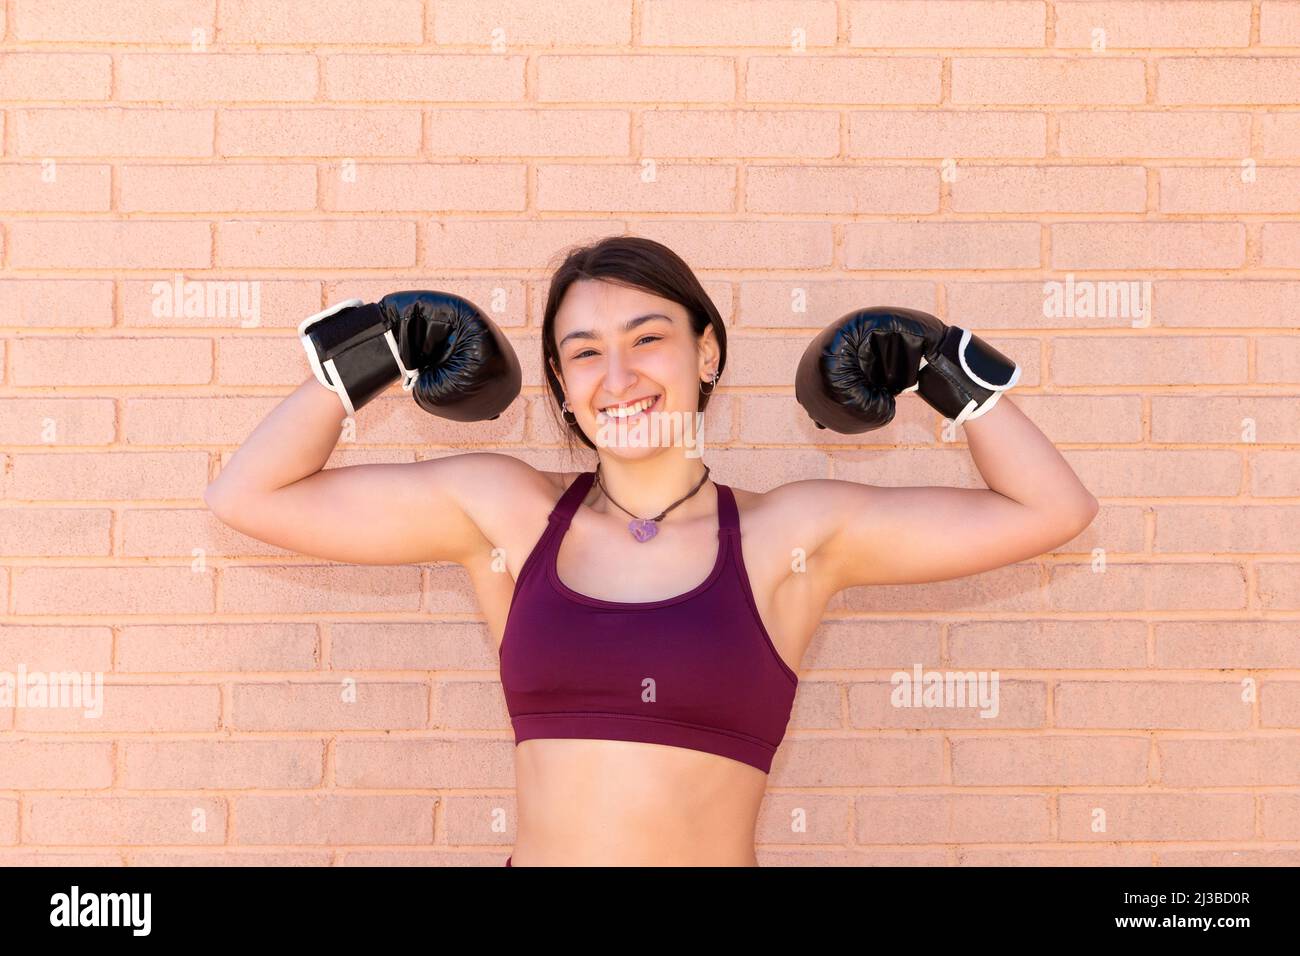 A smiling young Caucasian woman wearing black boxing gloves exerting force with her arms showing off her biceps. In the background is a brick wall. Stock Photo